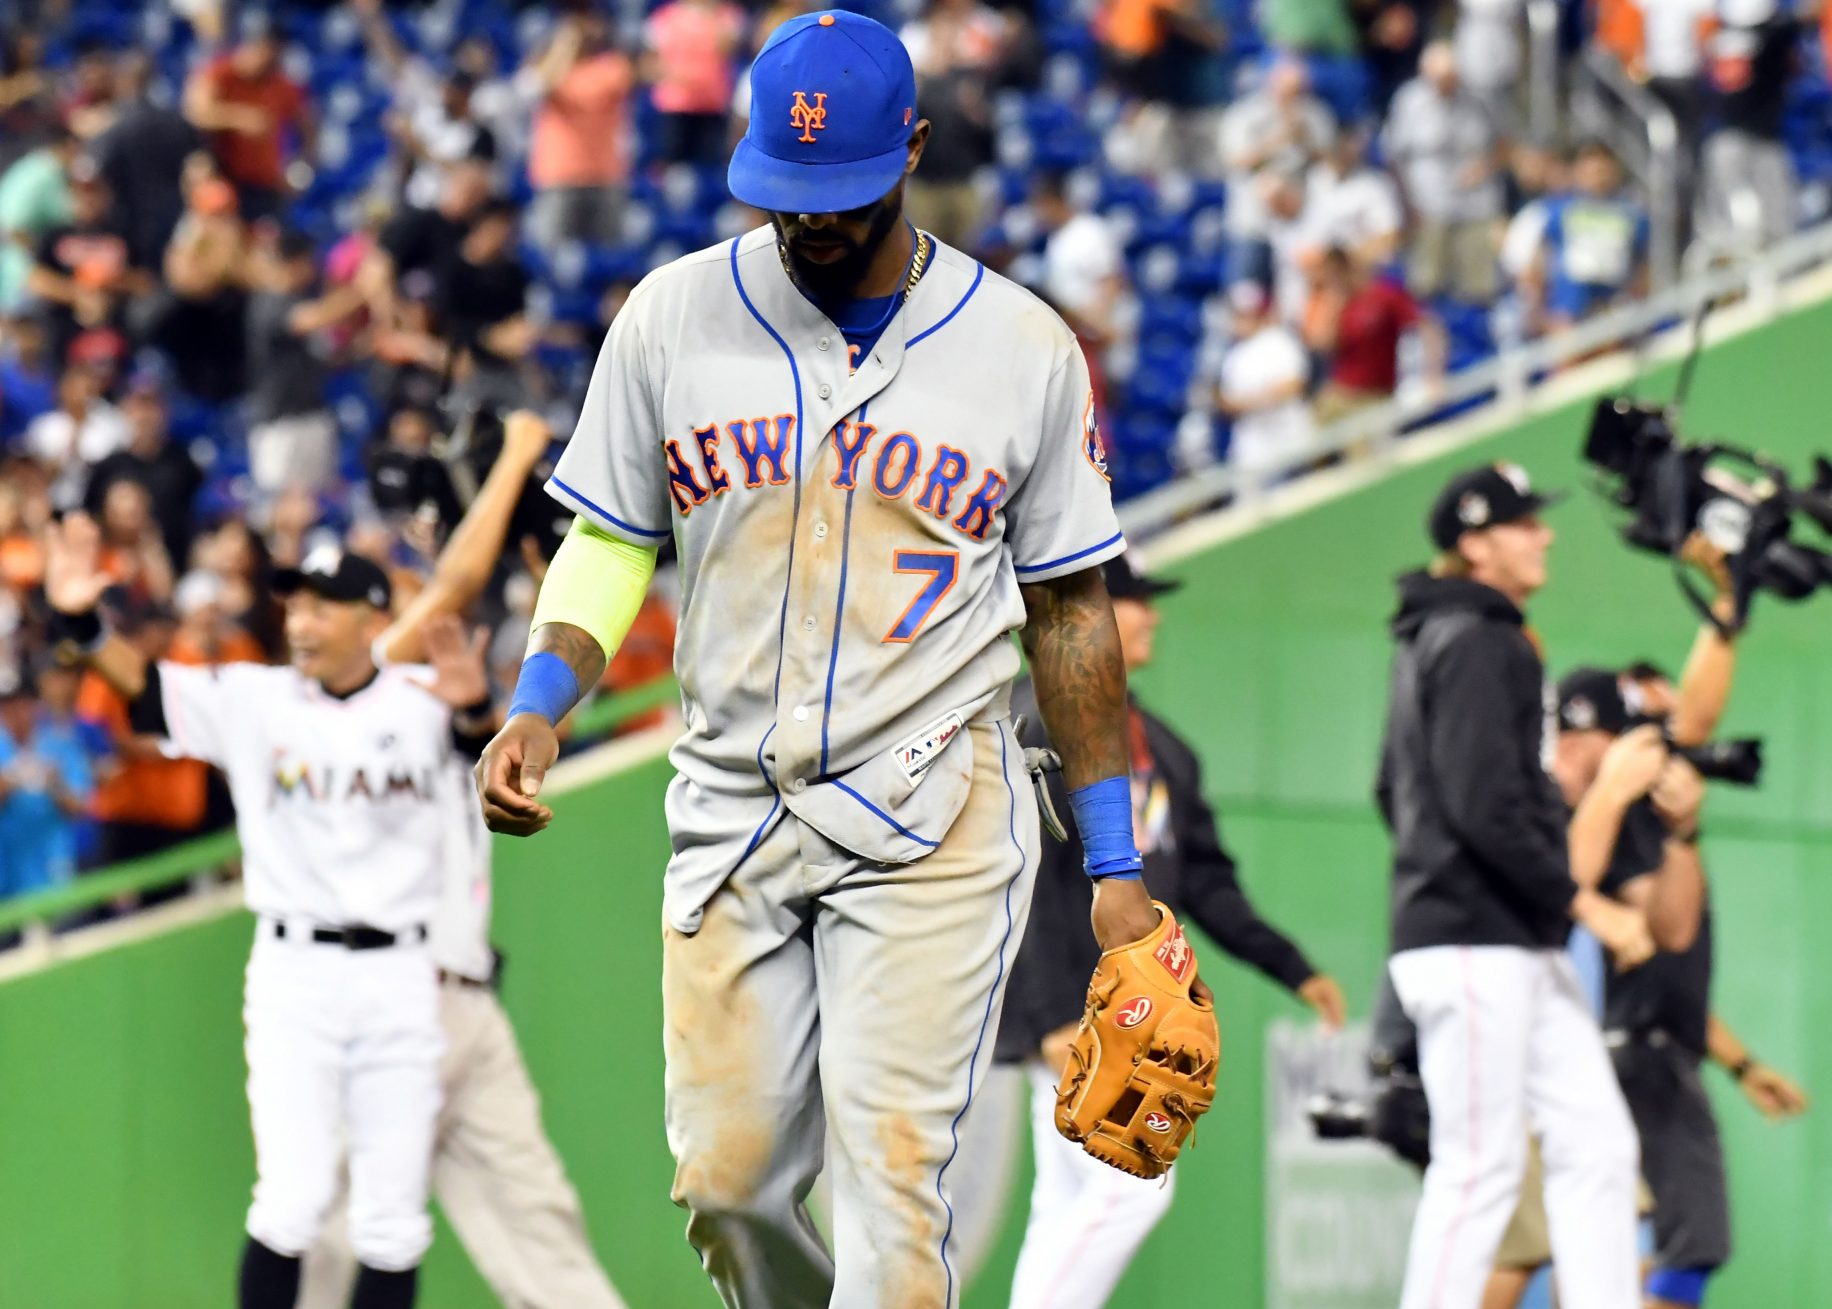 New York Mets: Face It, Jose Reyes 2.0 Has Been a Failure 